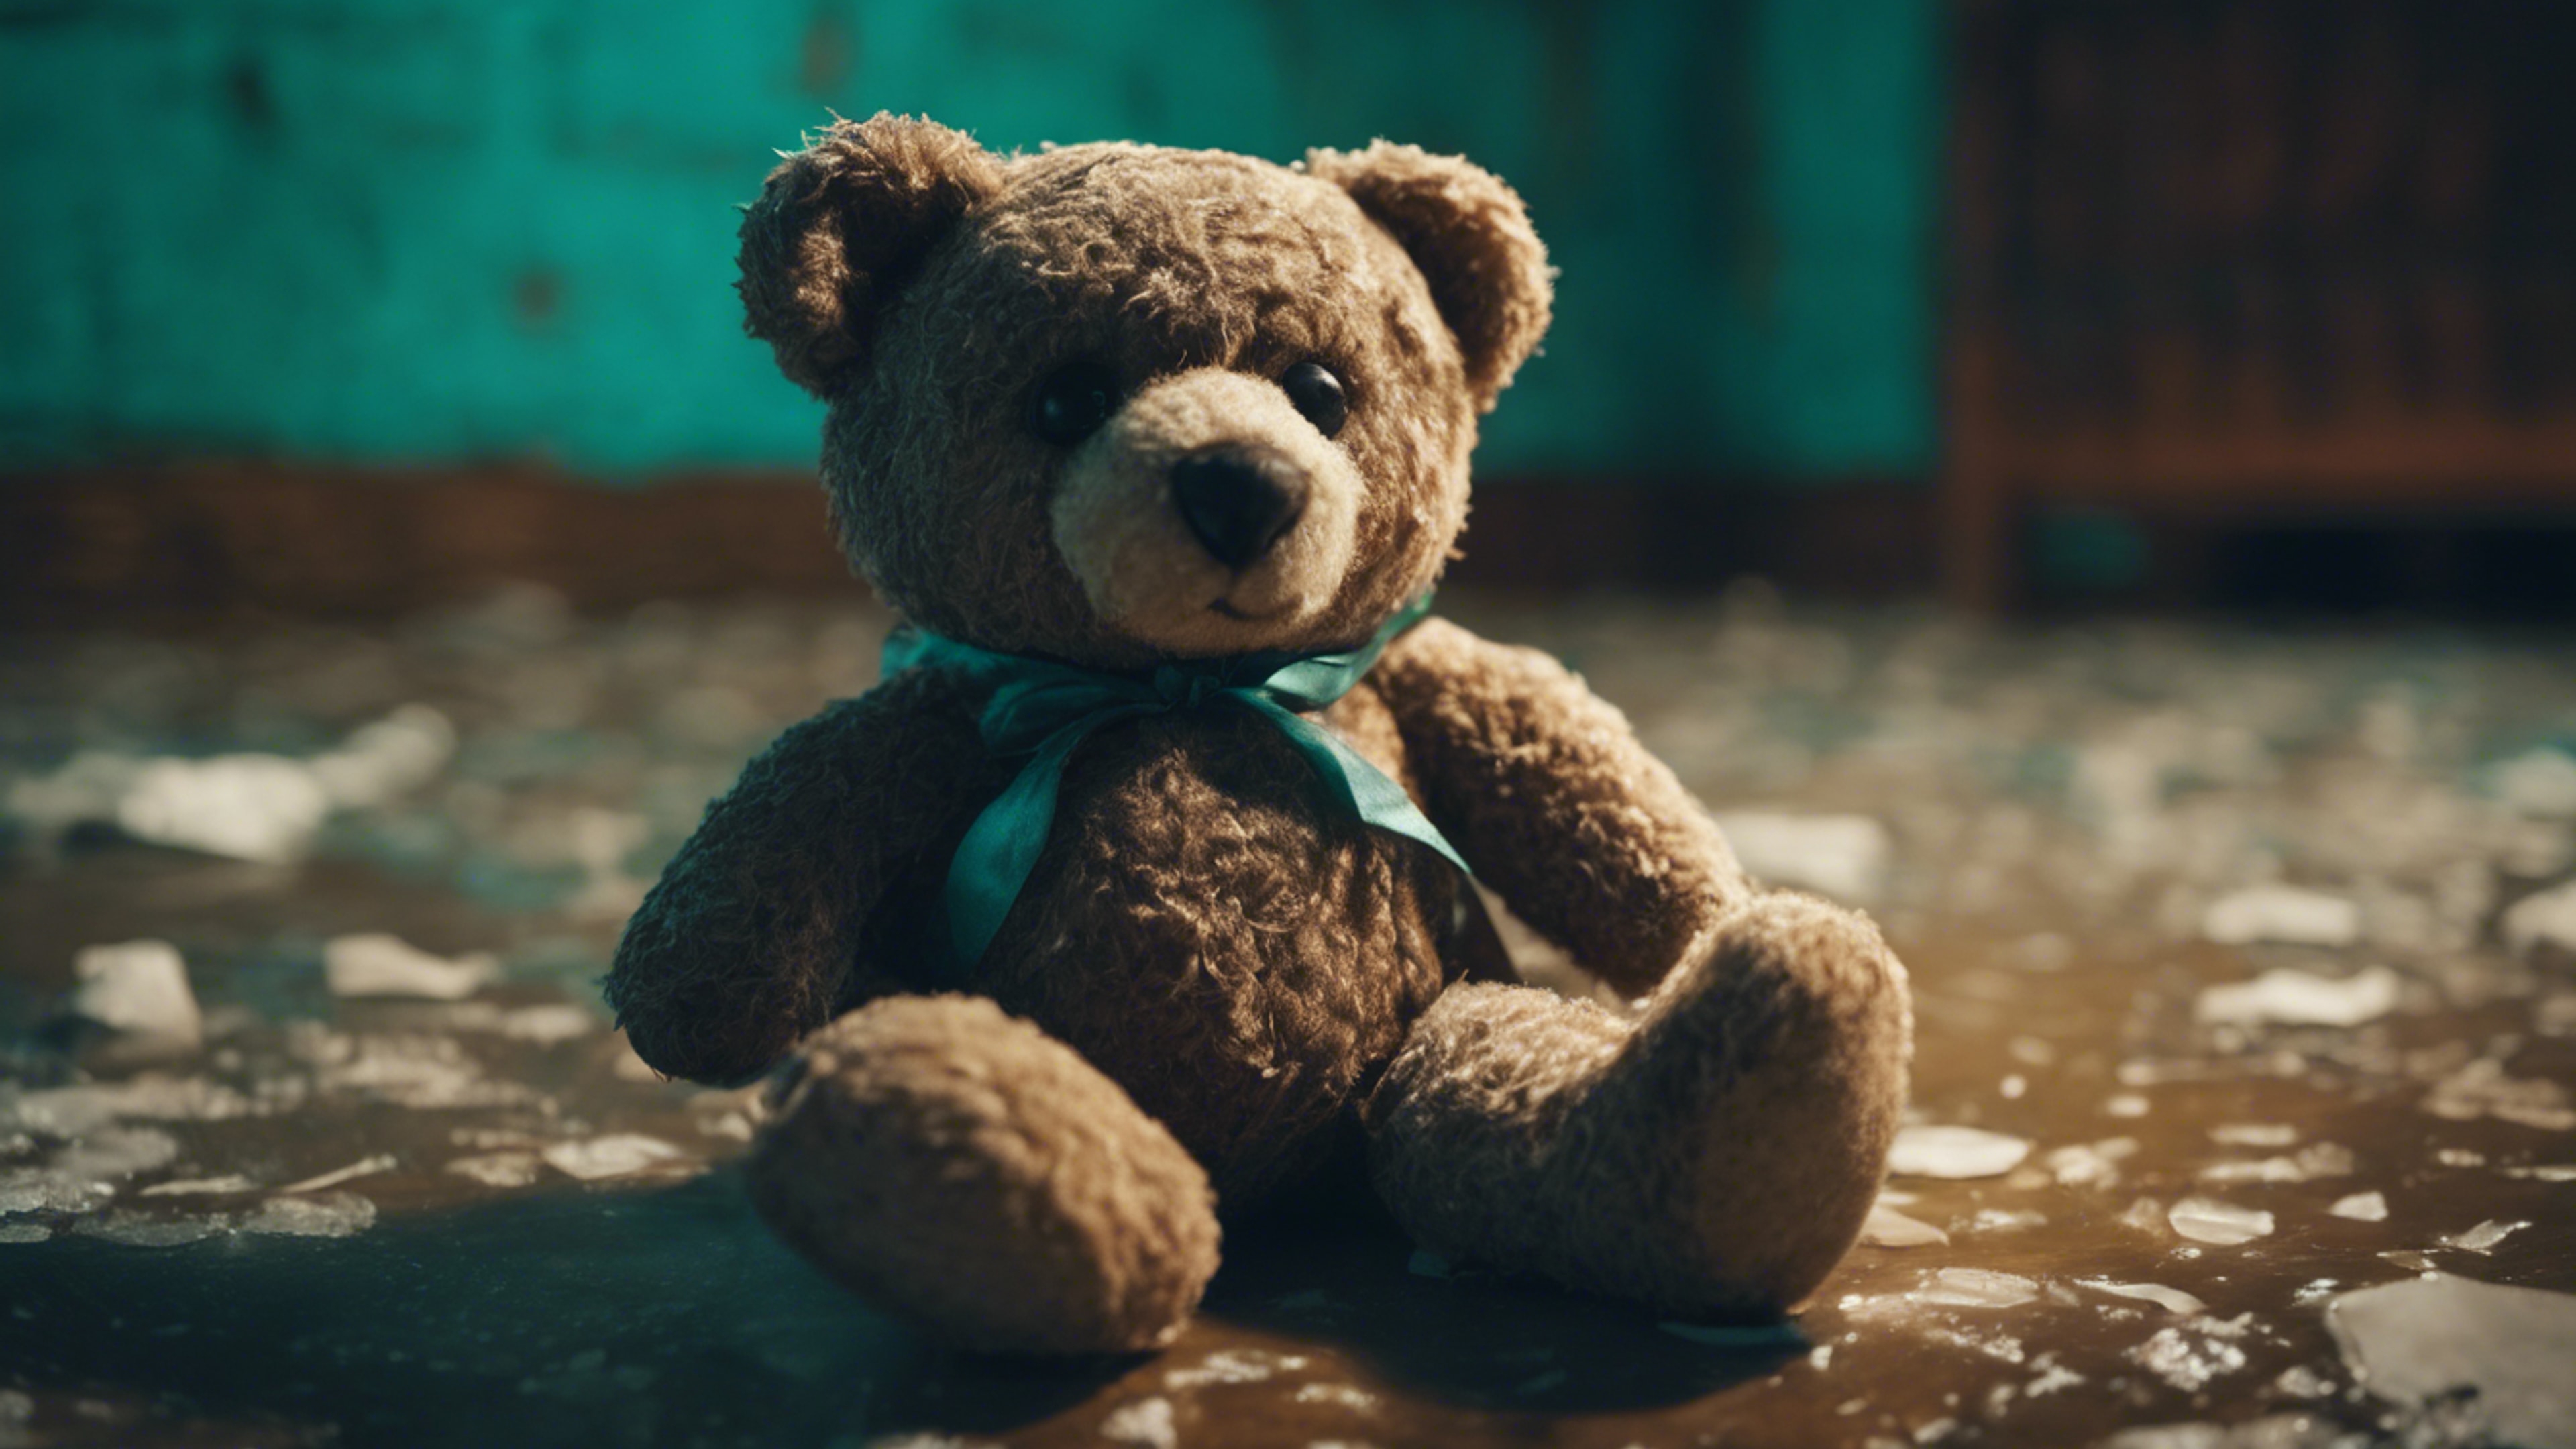 An orphaned gothic teddy bear lying in a quiet abandoned room illuminated in teal.壁紙[f4613294cb5e4a2b934c]